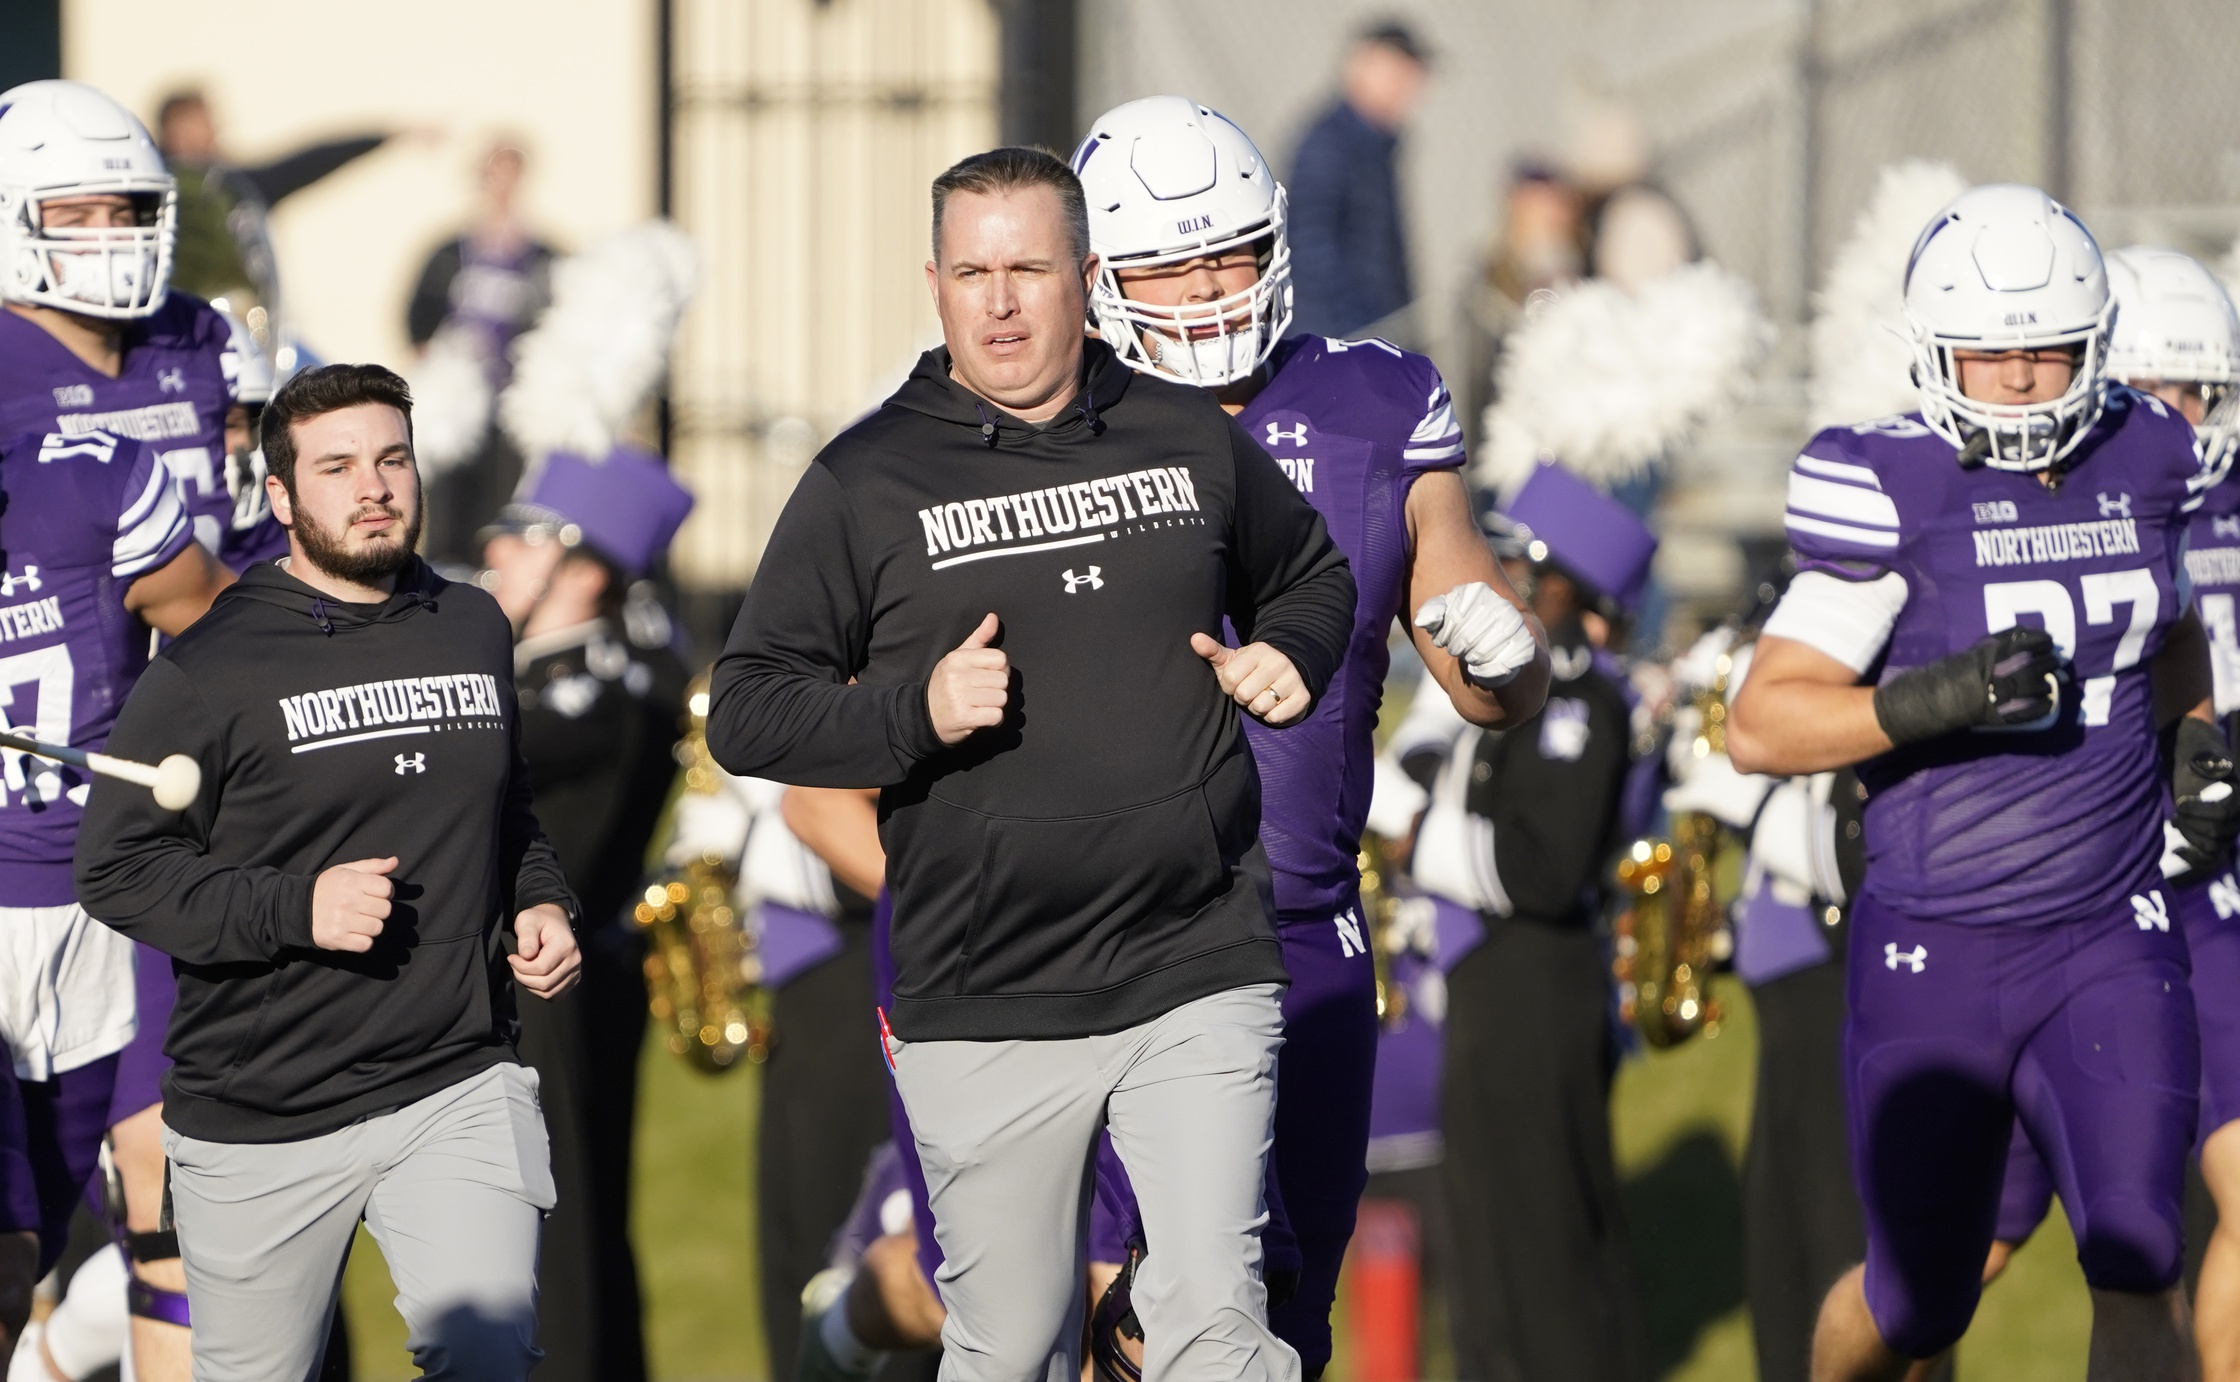 First lawsuit has been filed against Northwestern leaders & former head coach Pat Fitzgerald in hazing scandal